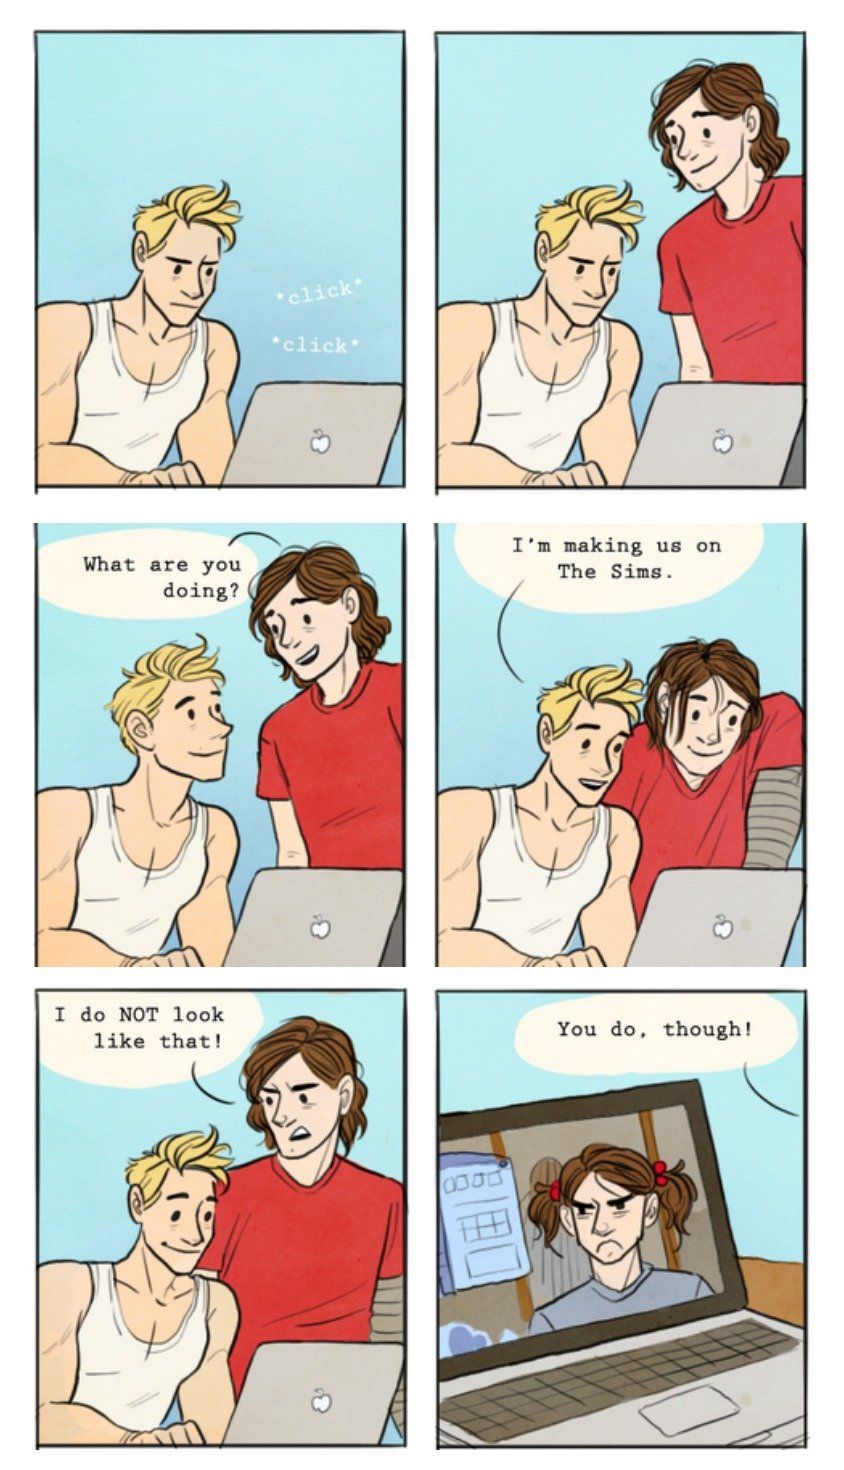 25 Hilarious The Sims Comics That Make Us Obsessed With The Game All Over Again